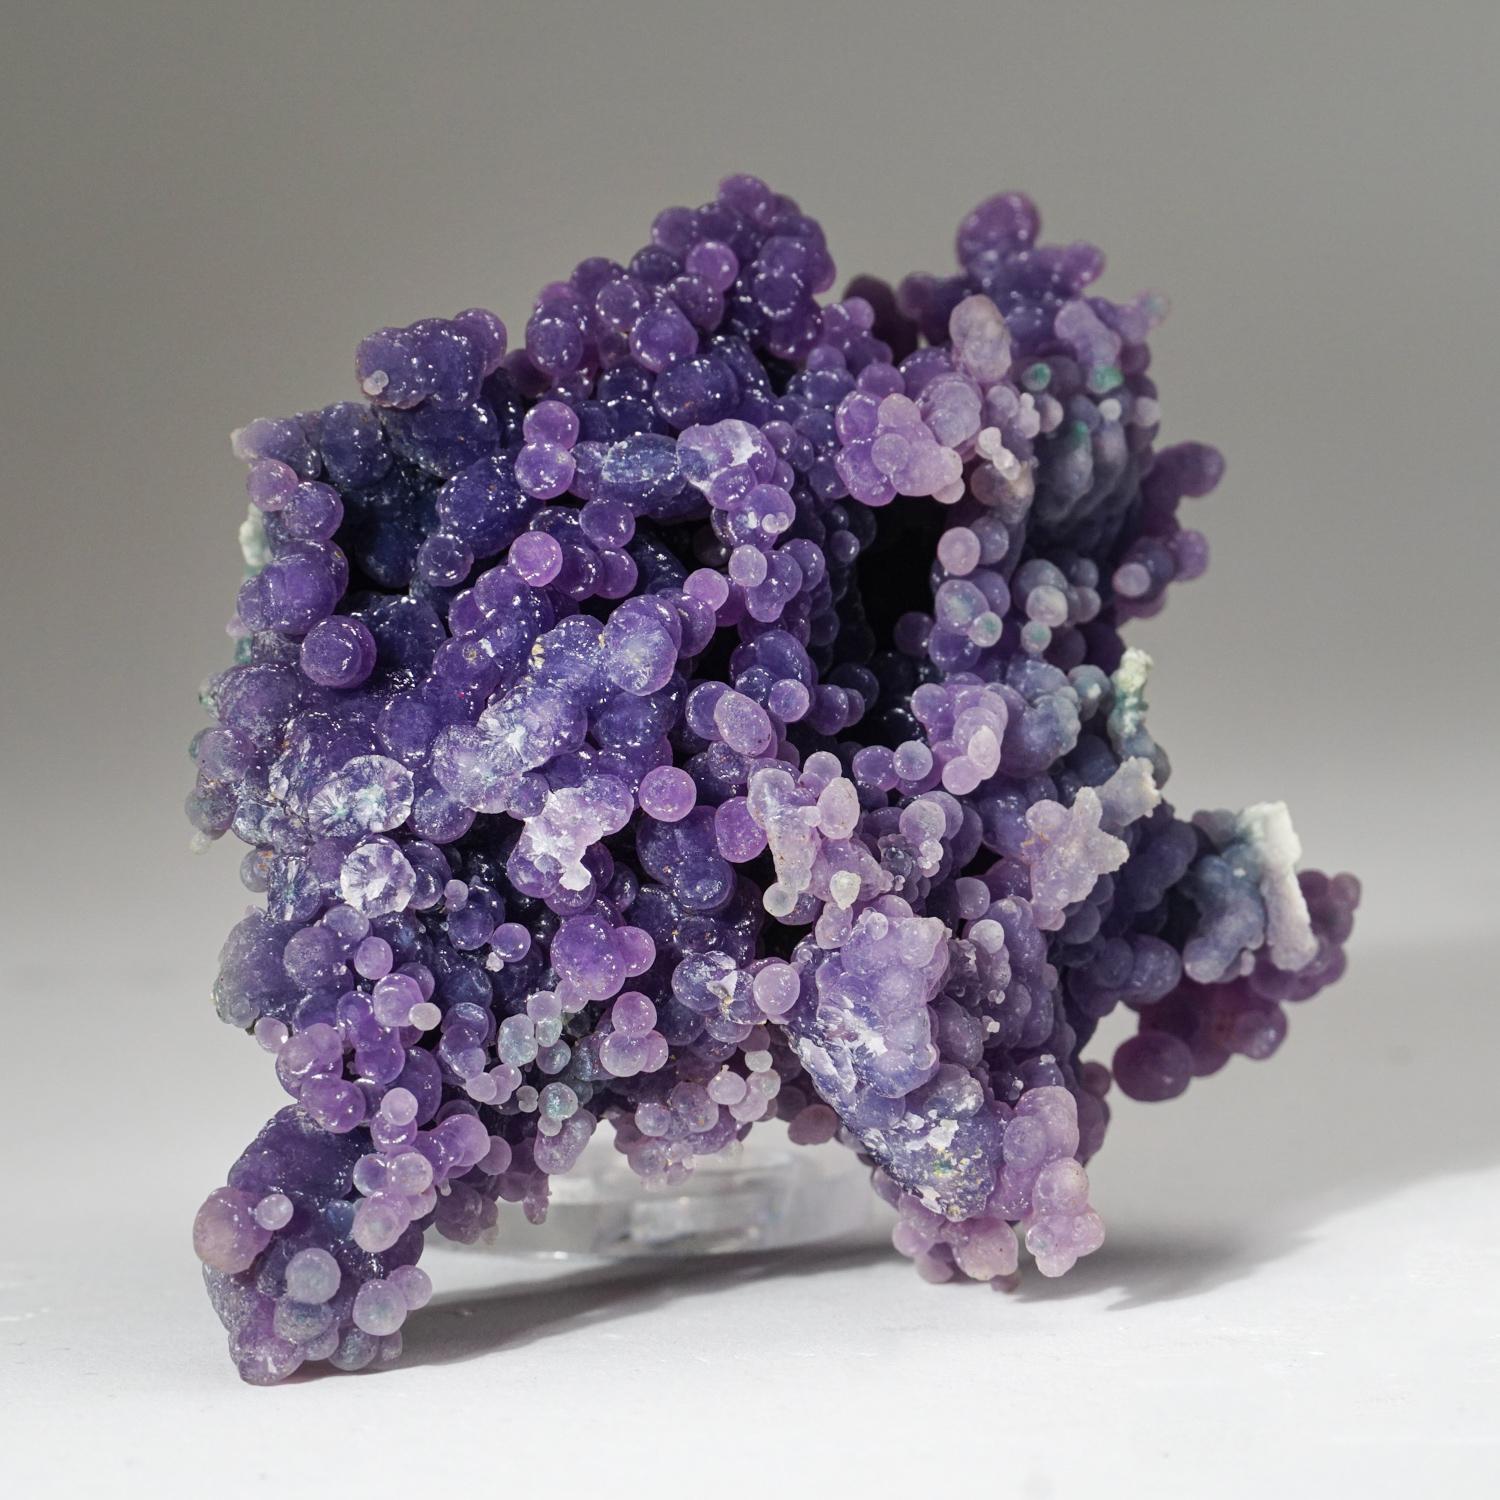 From near Pantai Manakarra, Mamuju, Sulawesi, Indonesia Double-sided cluster of translucent grape purple quartz agate in spherical formations with a radial internal structure and are found in cavities in pillow basalt. Also known as Grape Agate.